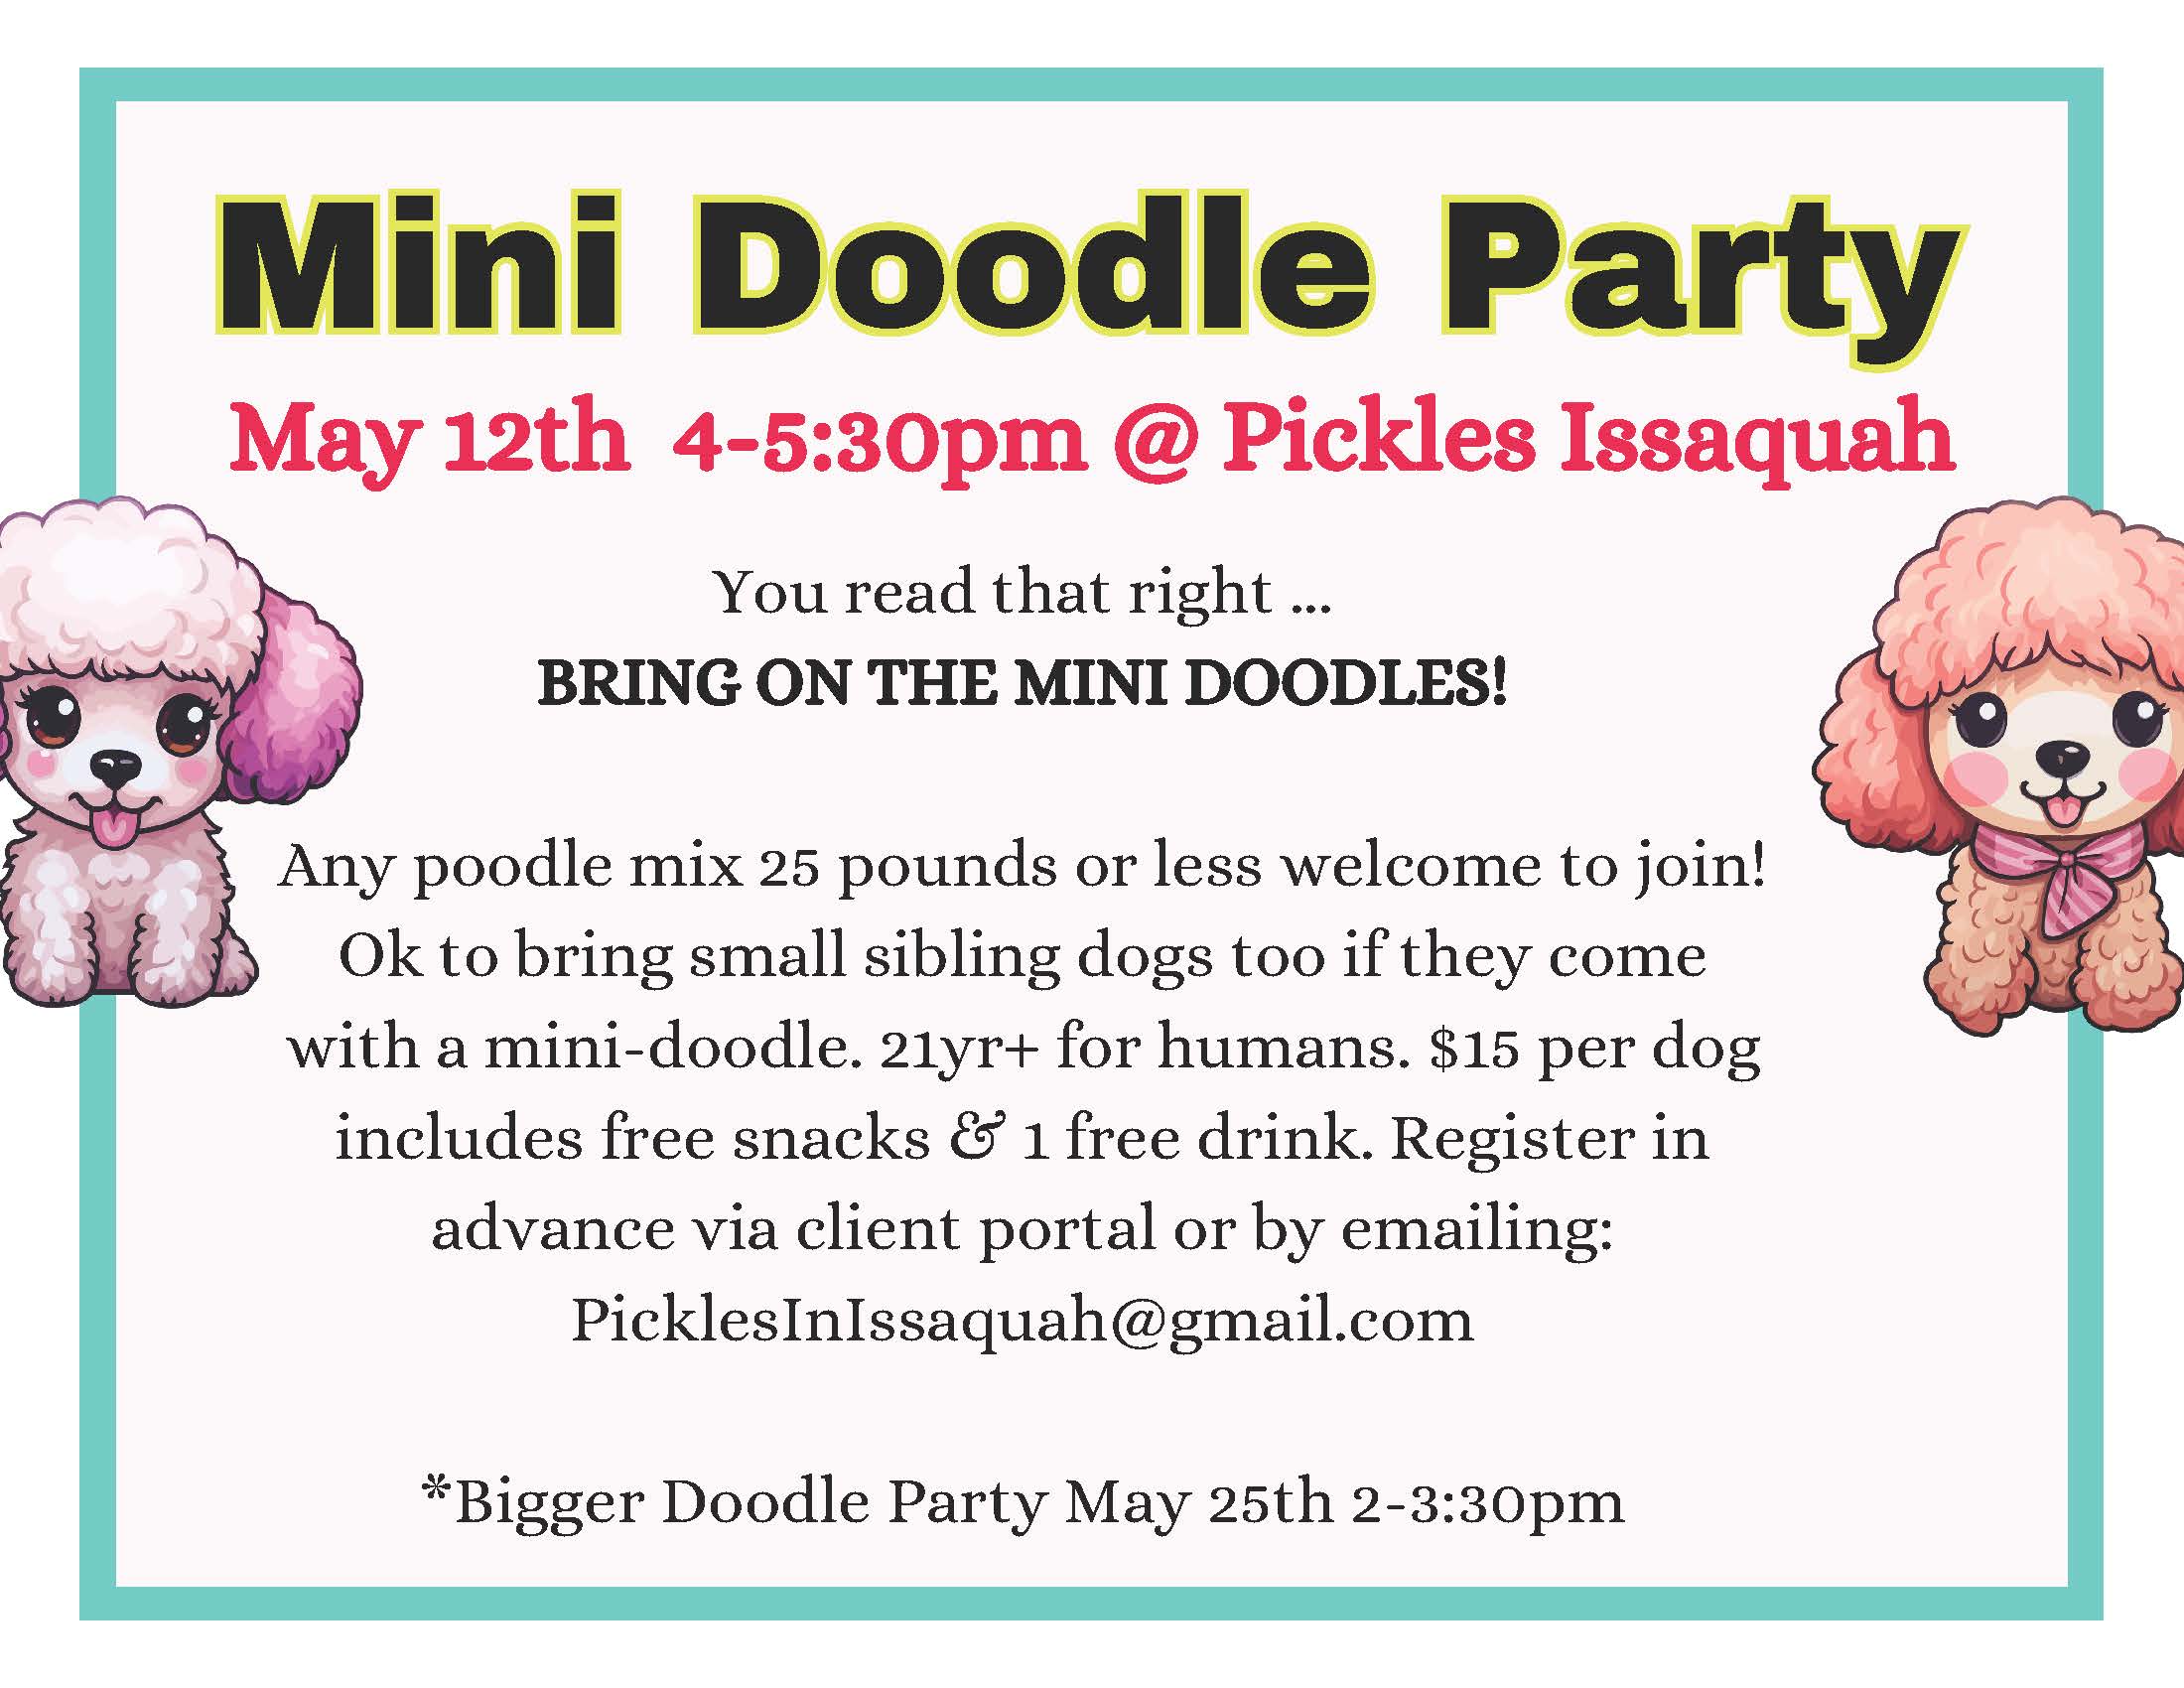 Mini doodle party May 12th